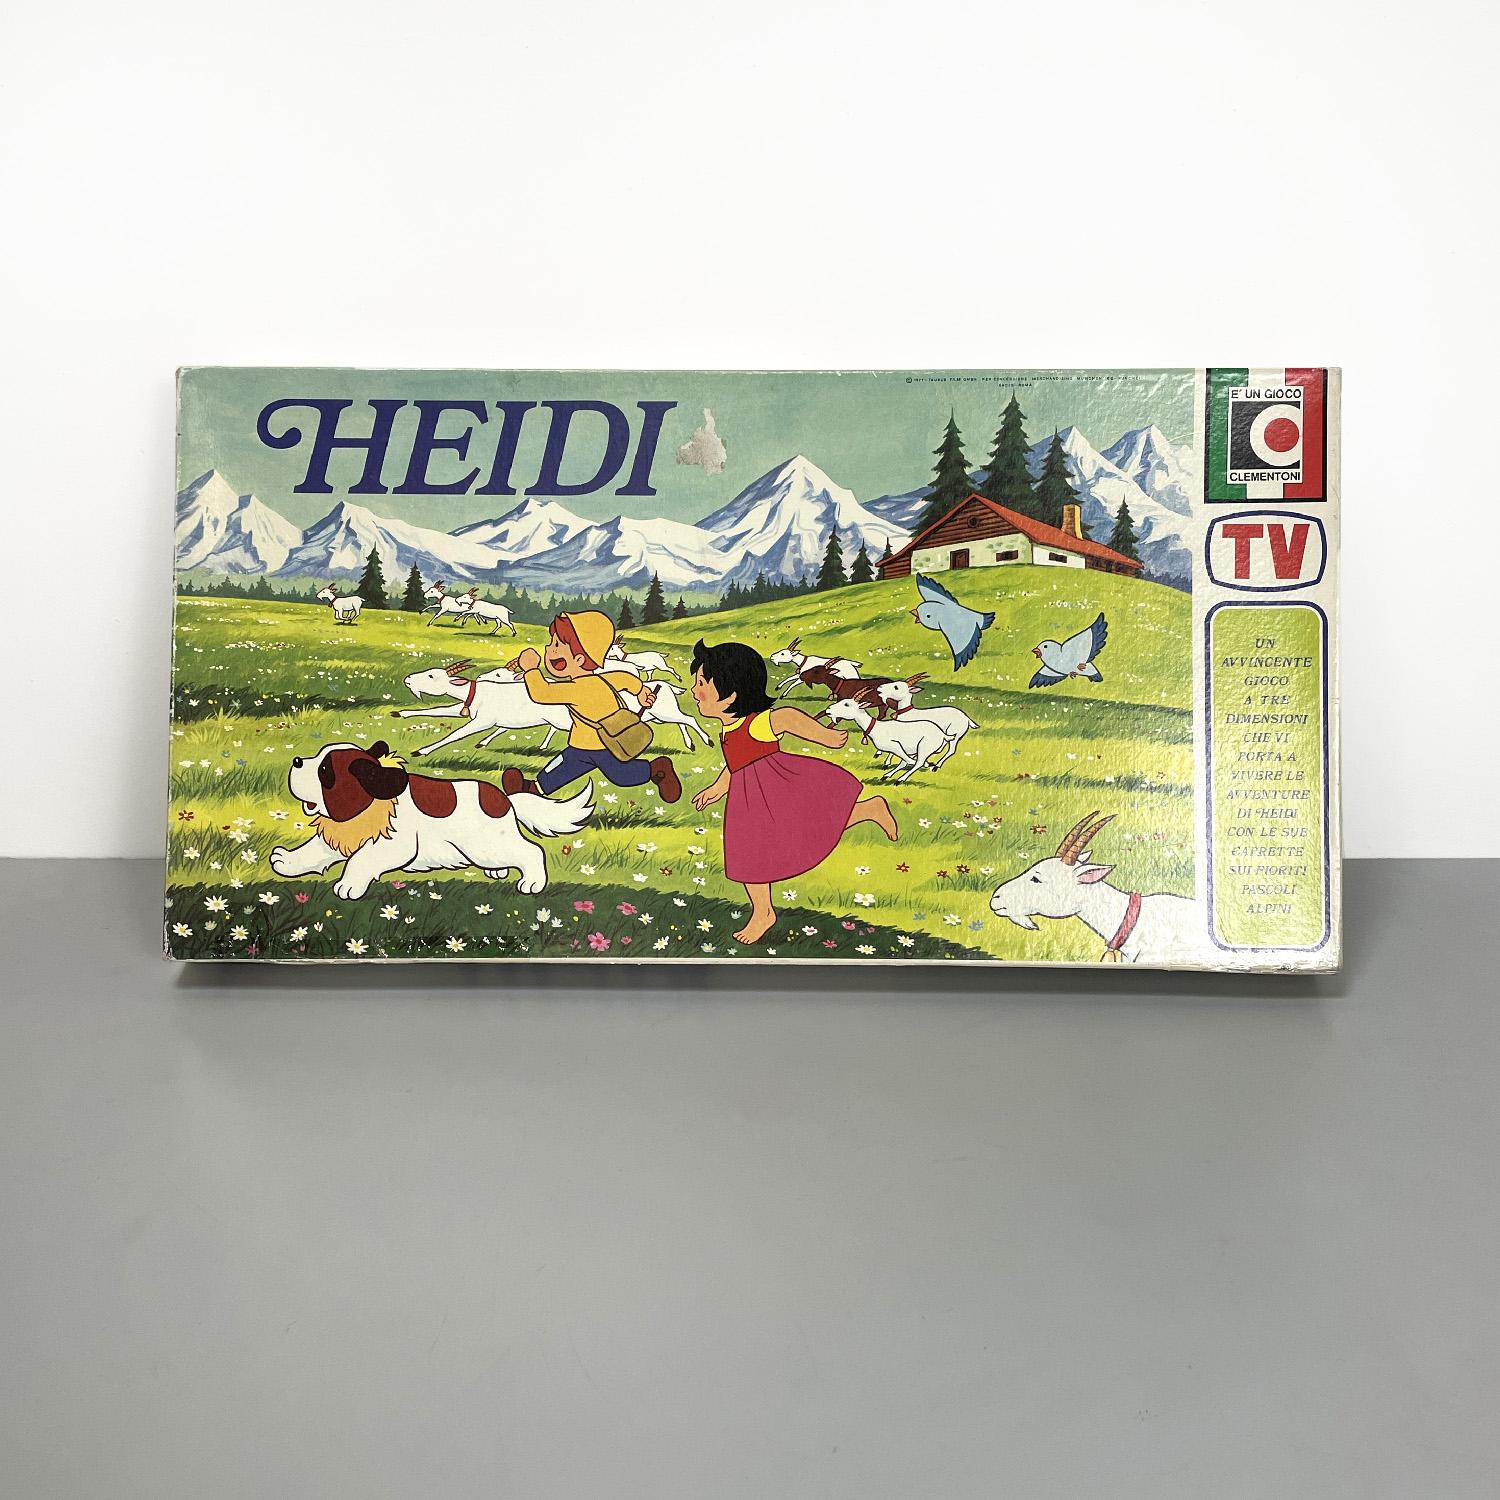 Italian modern Heidi board game by Clementoni, 1980s
Heidi board game with rectangular box, containing the pieces necessary for the game. On the top there is an image depicting the character from the famous cartoon with some